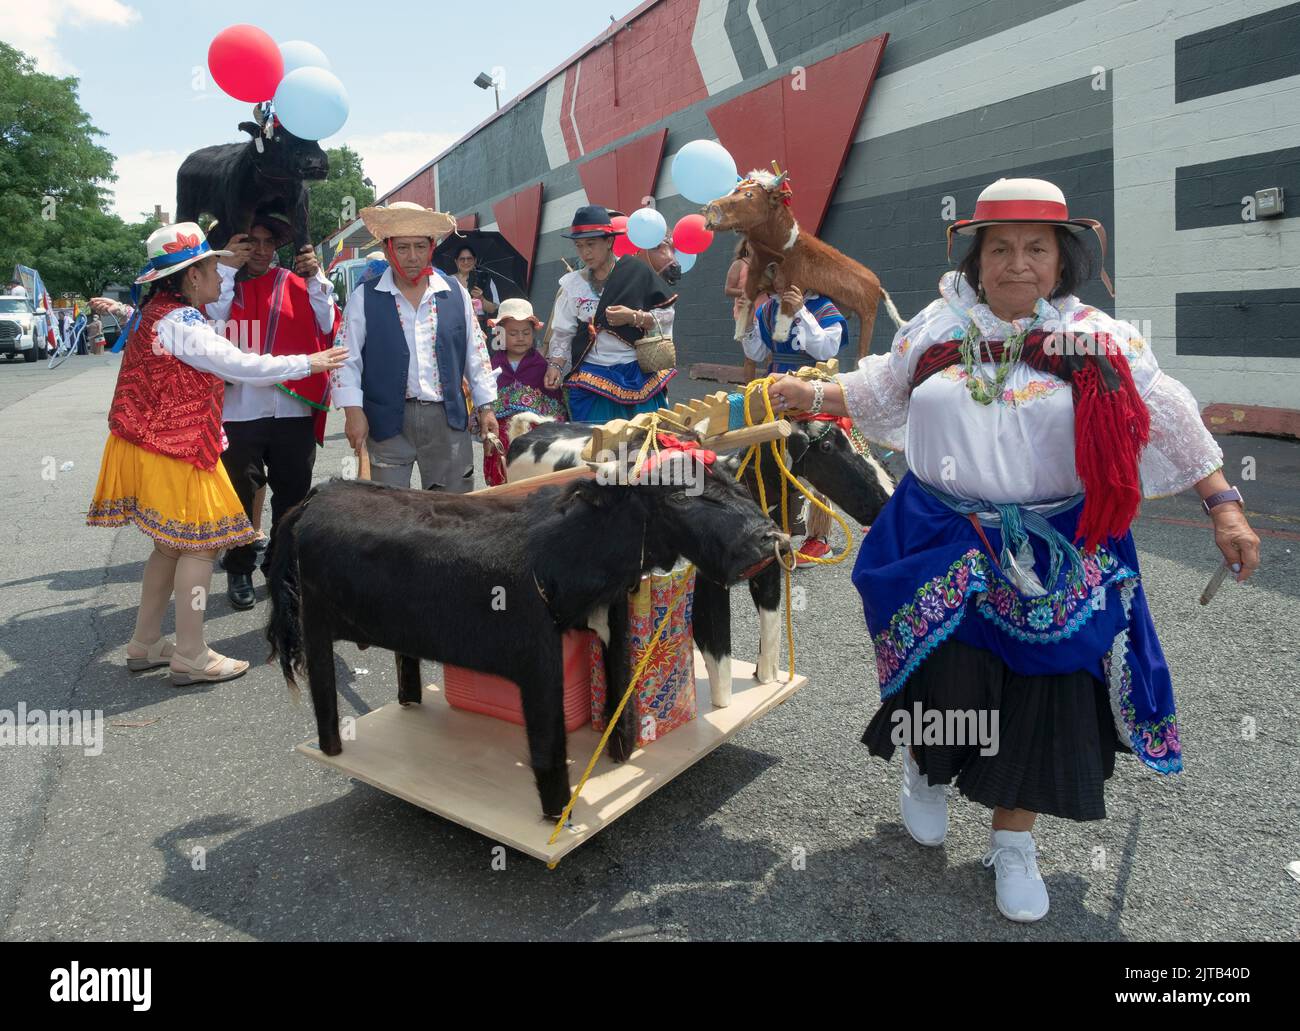 Marchers in traditional clothing and with wooden animal statues.at the Ecuadorian Parade NYC 2022 in Queens, New York. Stock Photo